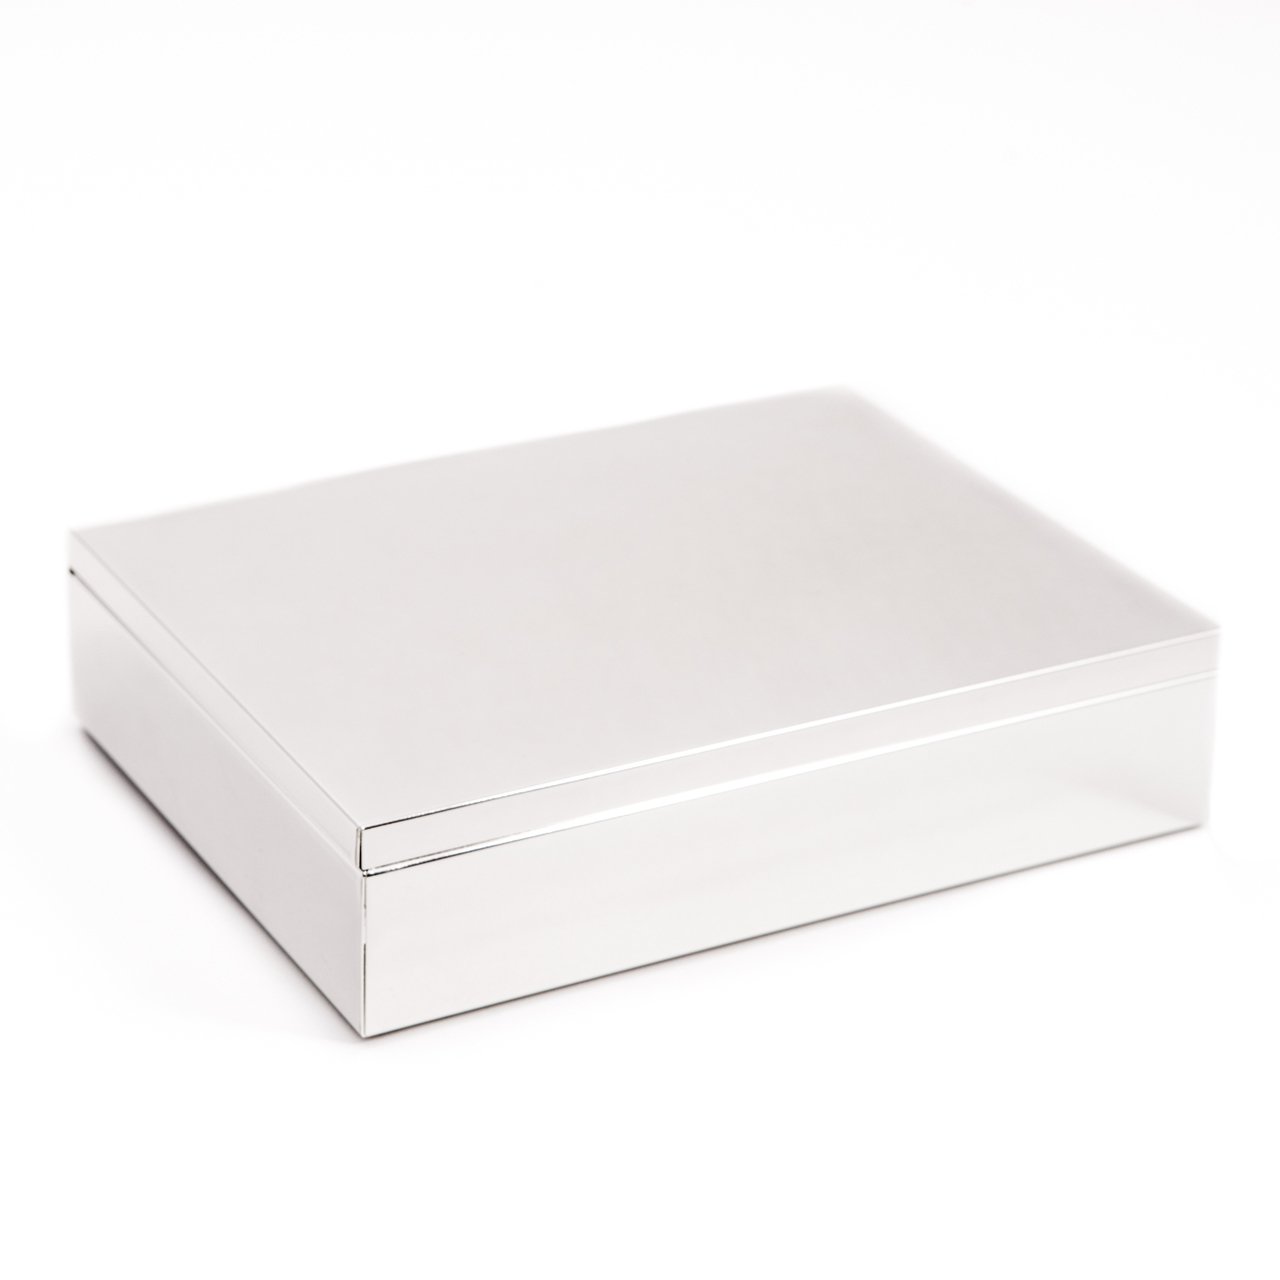 Silver Plate Stationery Box | Rectangular Desk Box | 6 by 8 Inch Silver Stationery Box | Custom Box for Corporate Gift Giving | Sterling and Burke Ltd-Desk Accessory-Sterling-and-Burke